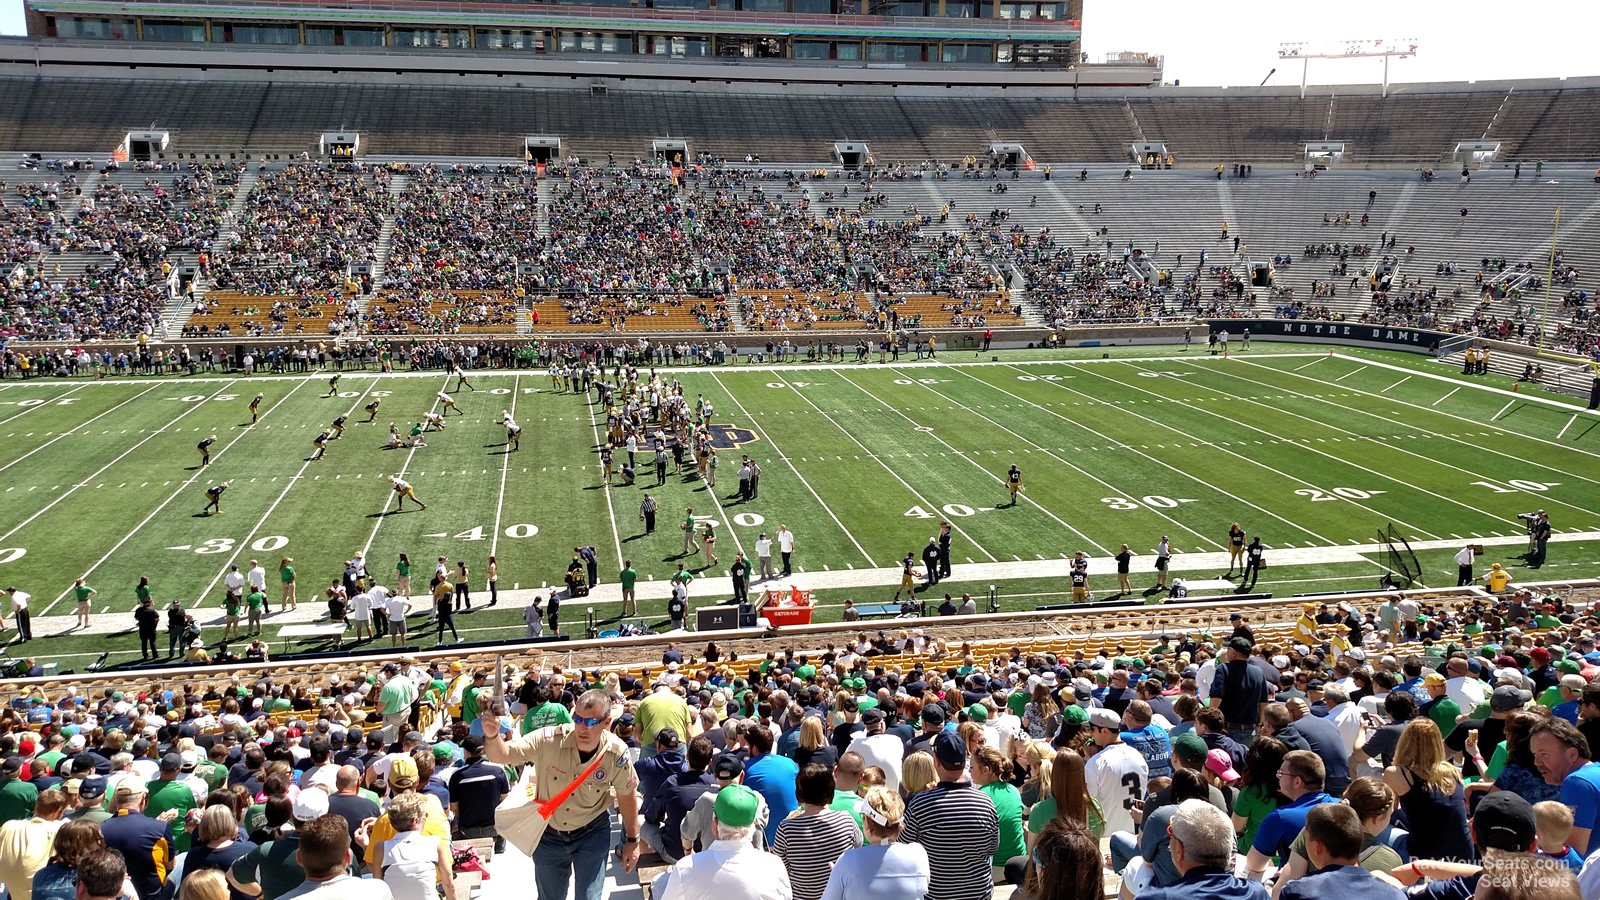 section 28, row 52 seat view  - notre dame stadium